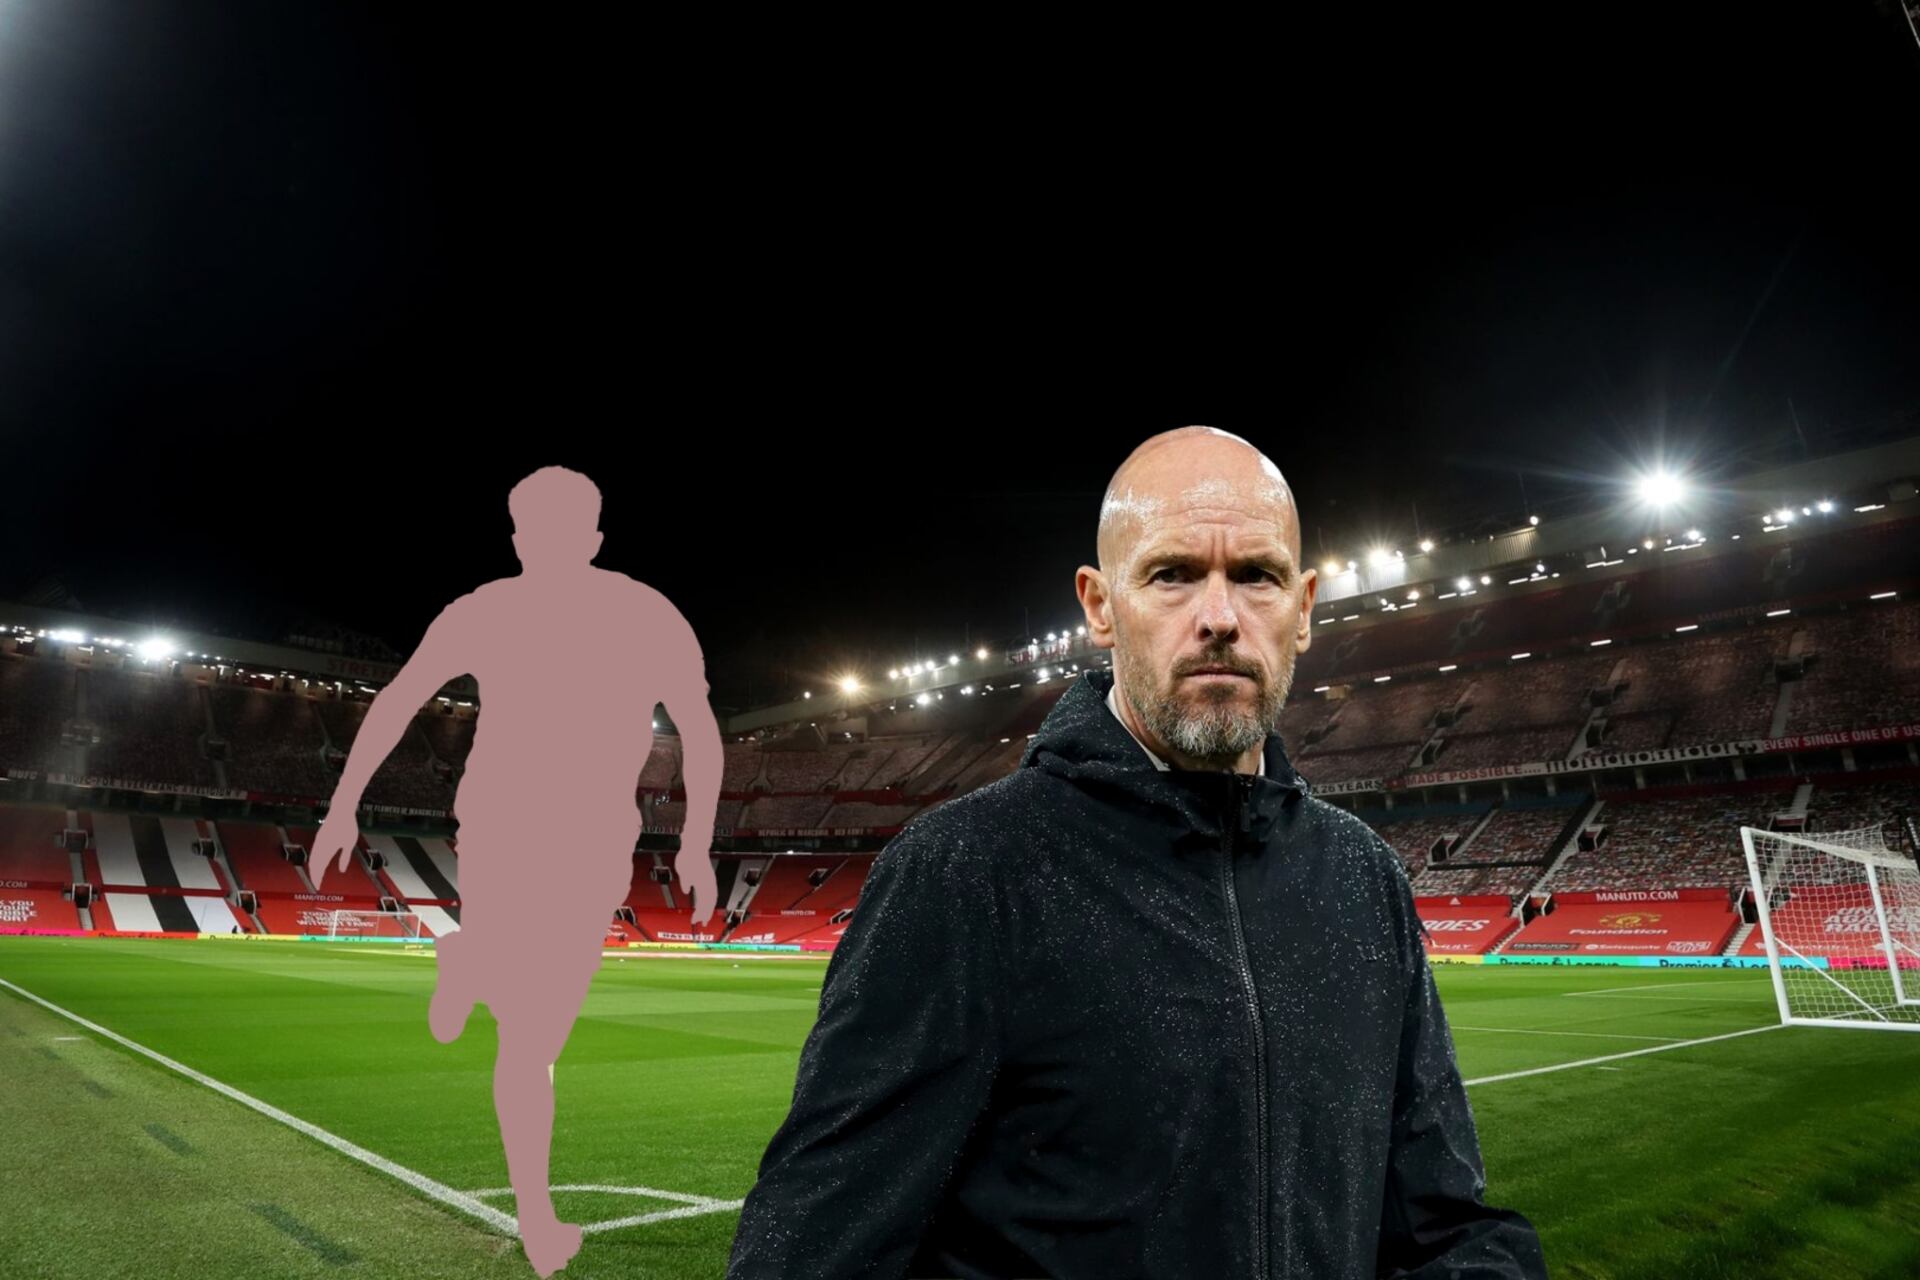 The star who is open to return to Man United, but under one condition that Ten Hag wouldn't like at all